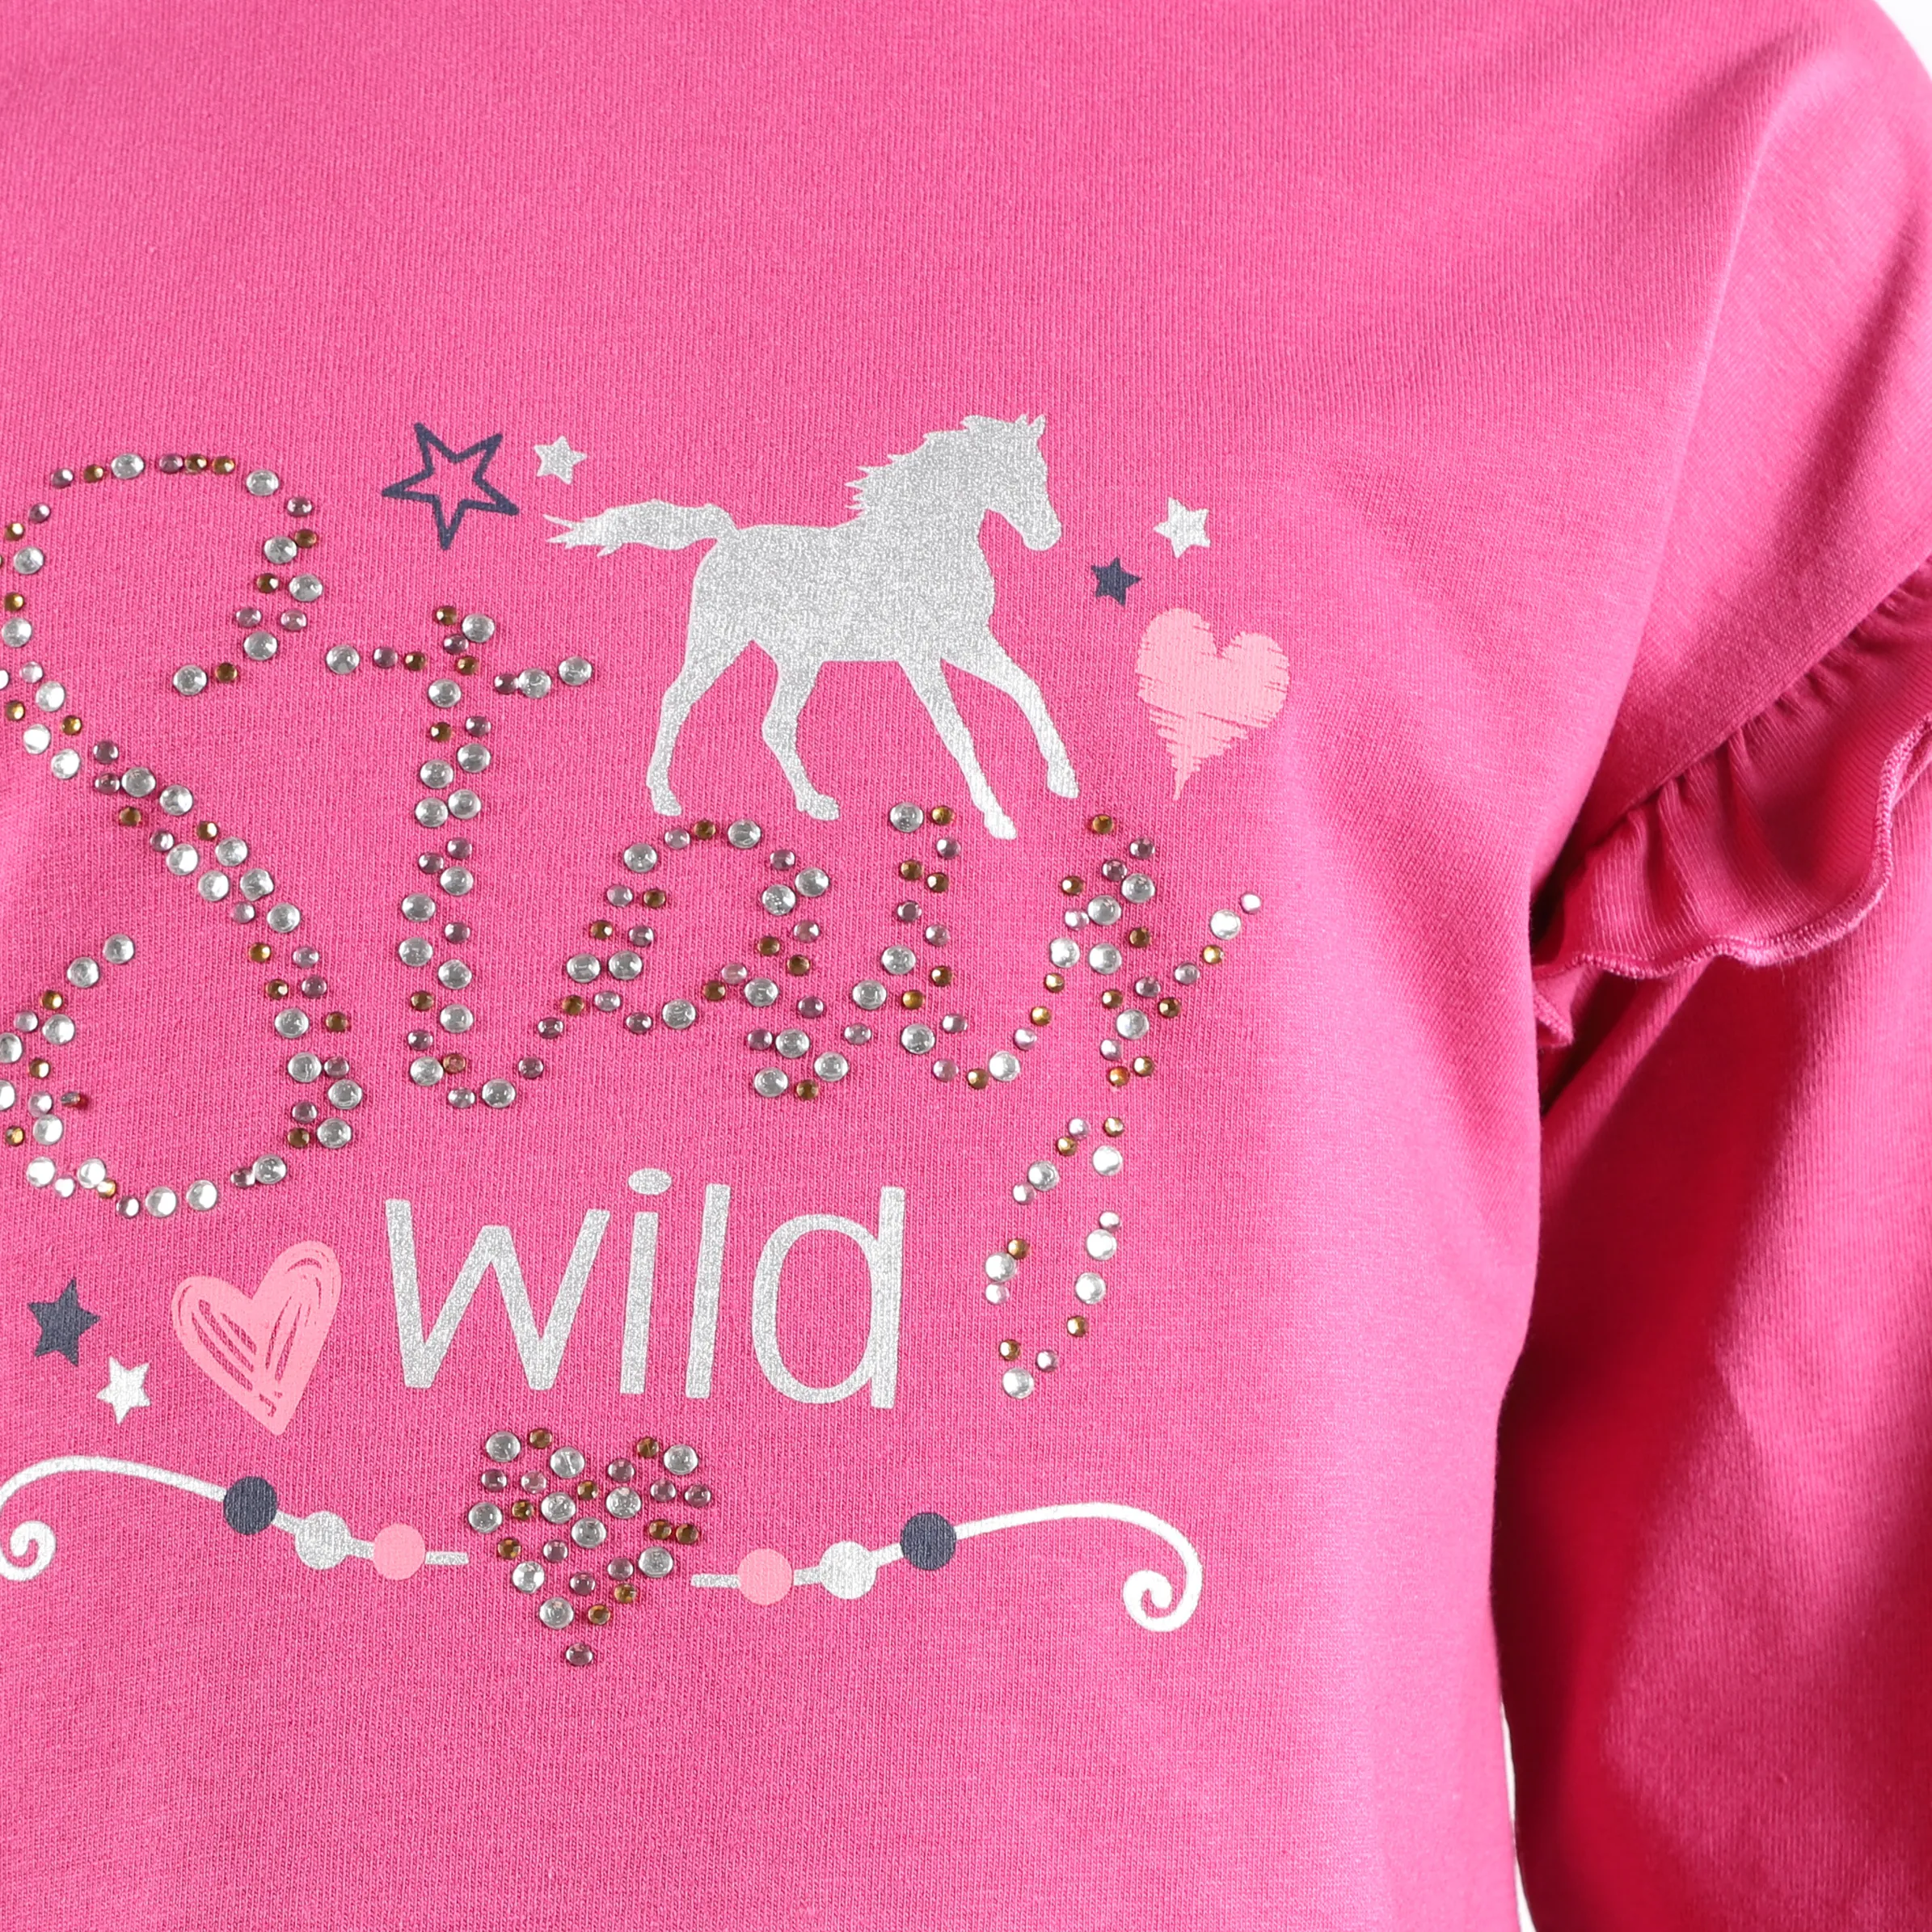 Stop + Go KM Longsleeve Shirt in pink Stay Wild Pink 881561 PINK 3